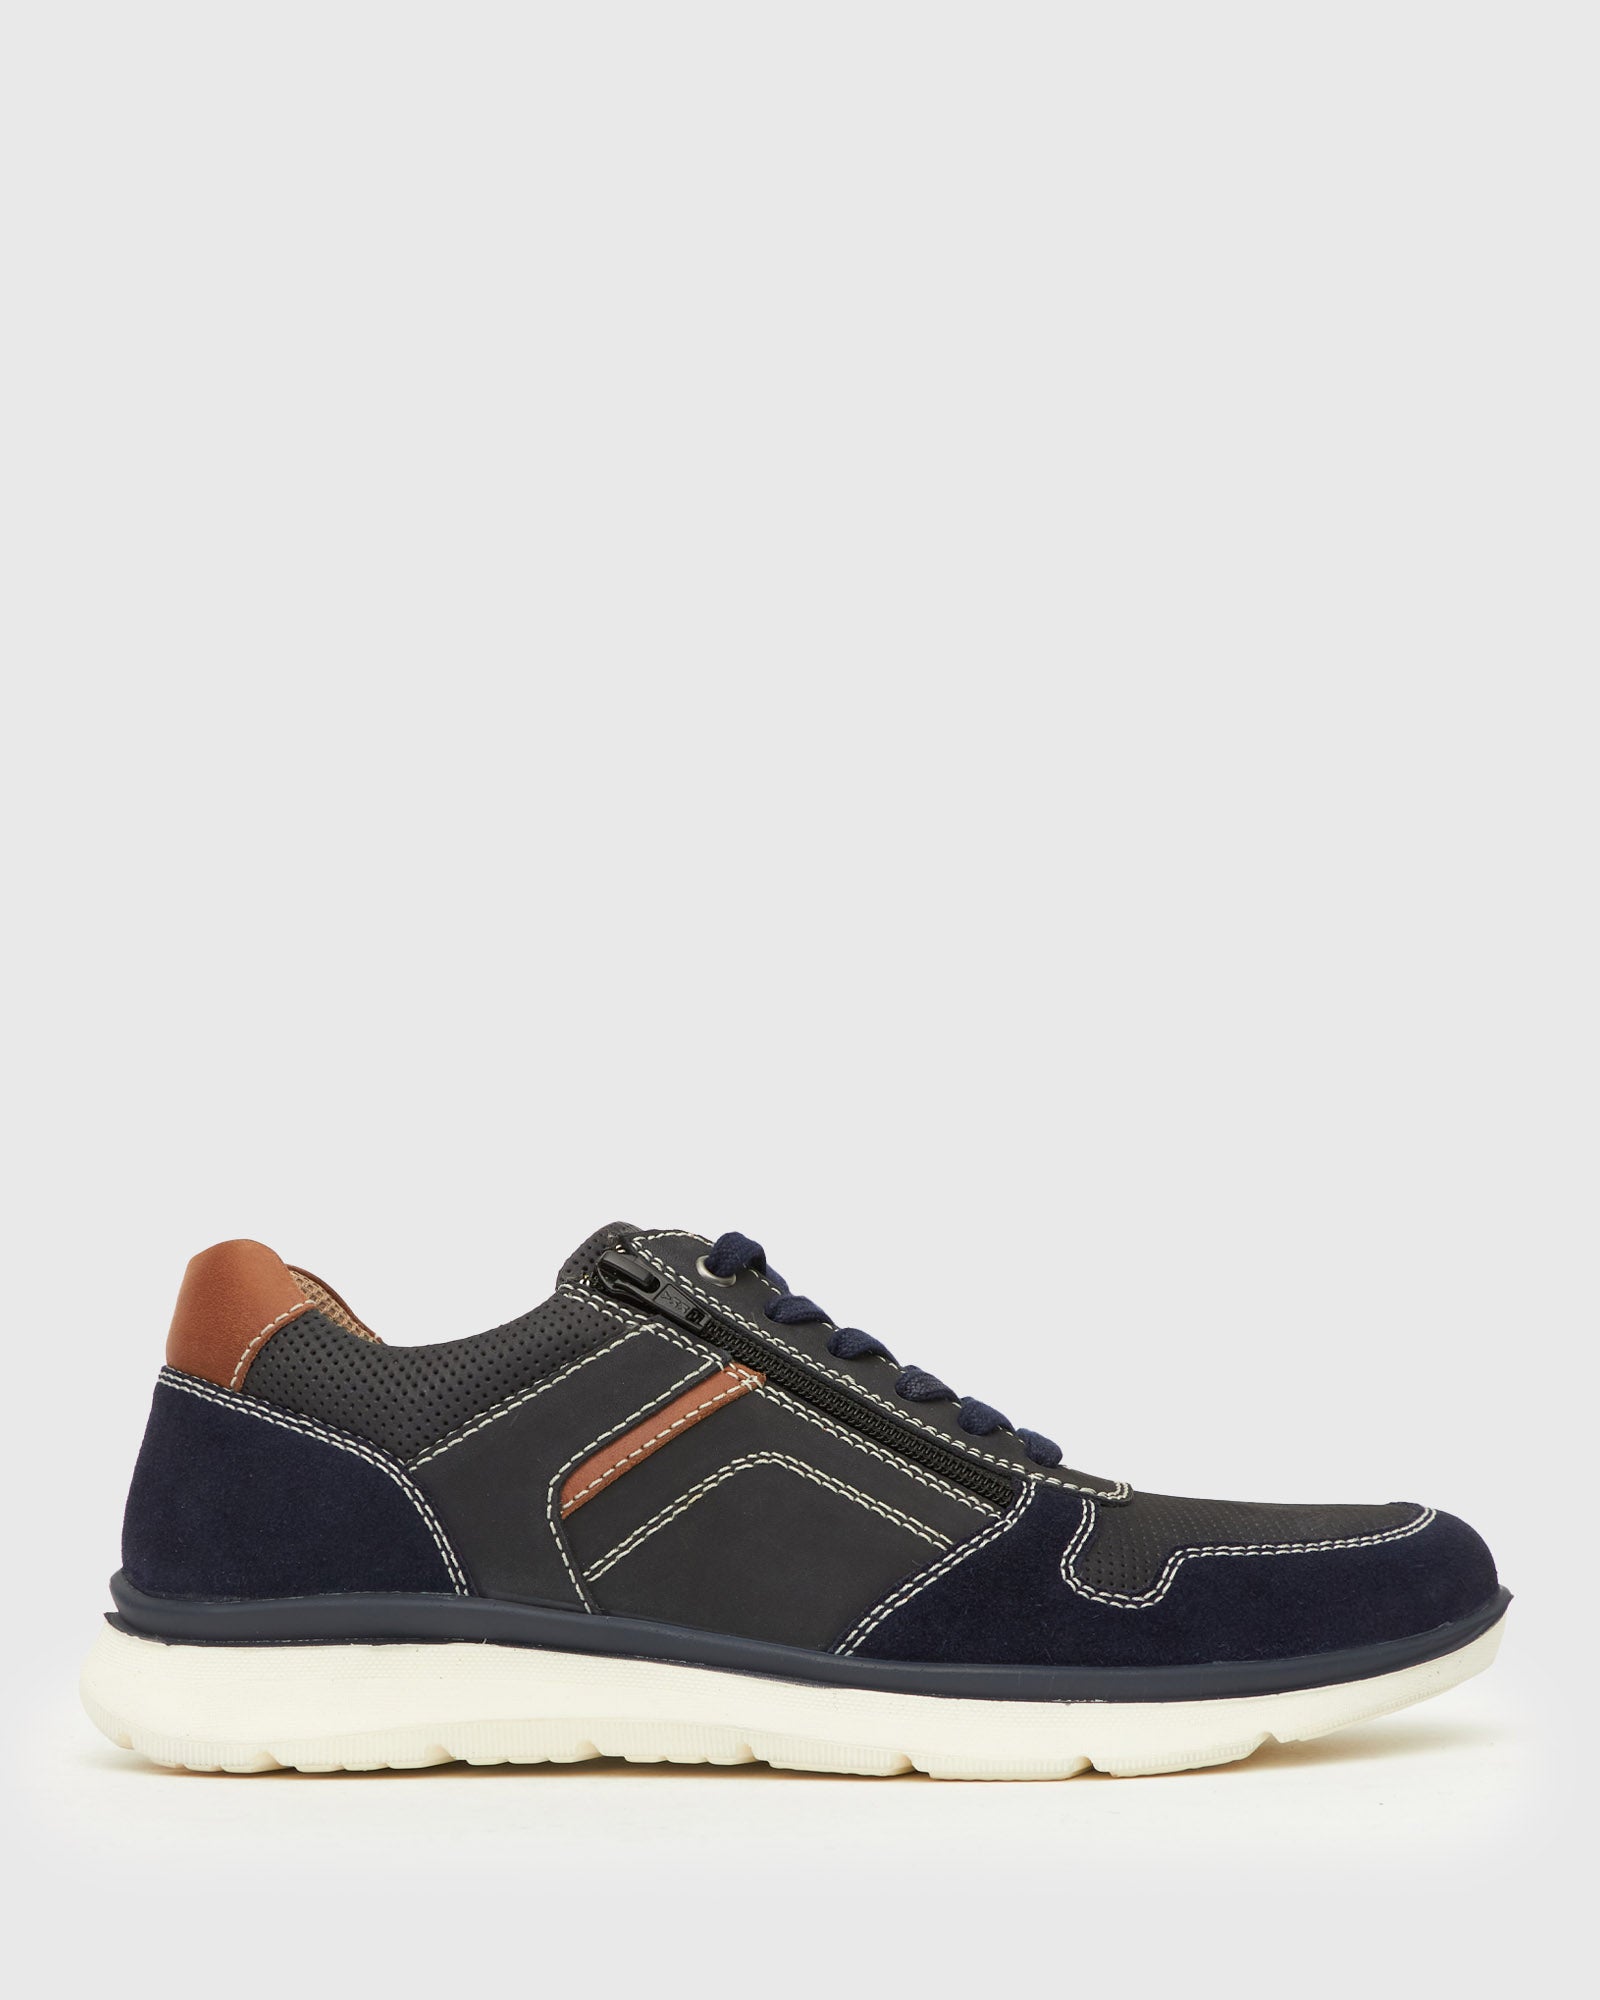 Buy NORMAN Casual Sneakers by Airflex online - Betts